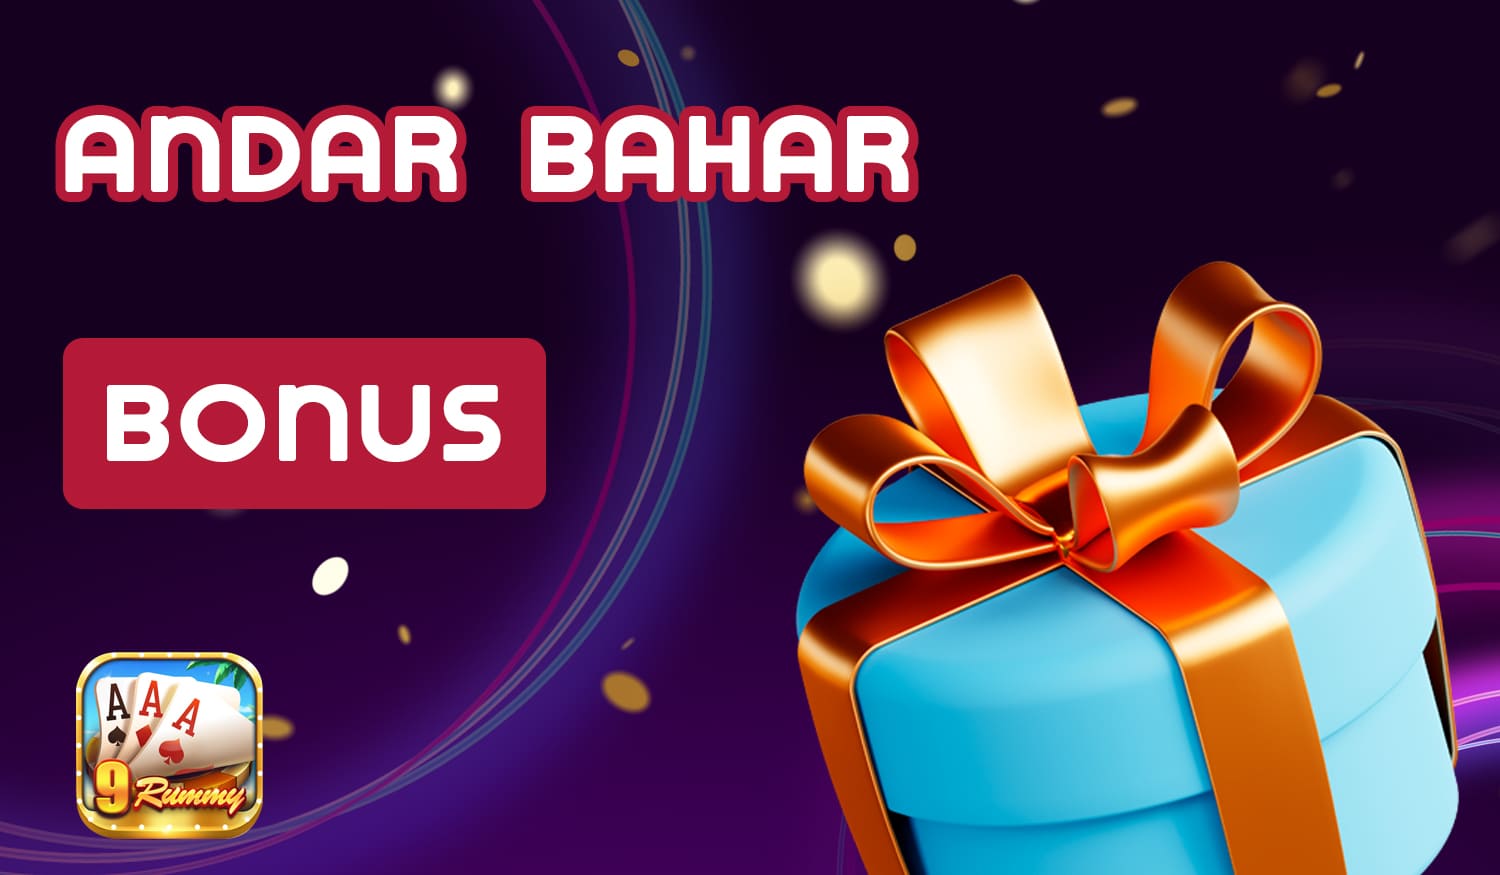 What bonuses Indian players can get on 9 Rummy website